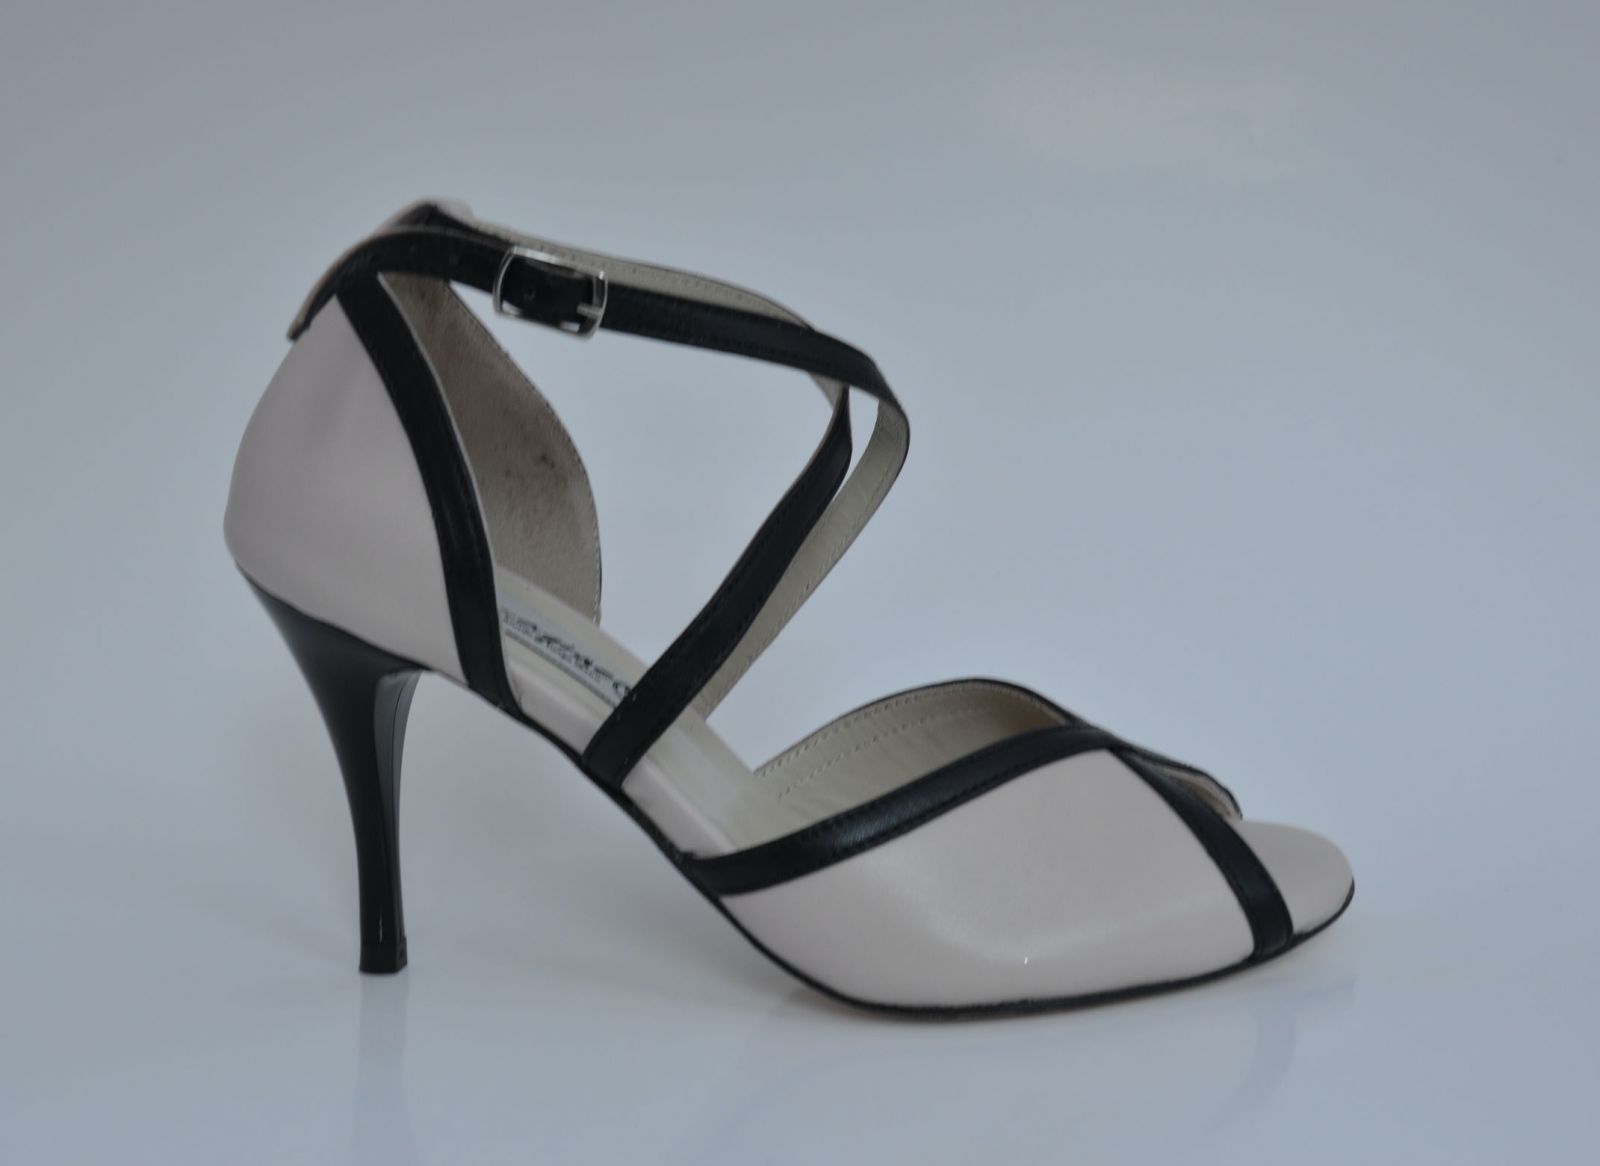 Women's Tango Shoe, peep toe style, in beige leather and  black leather